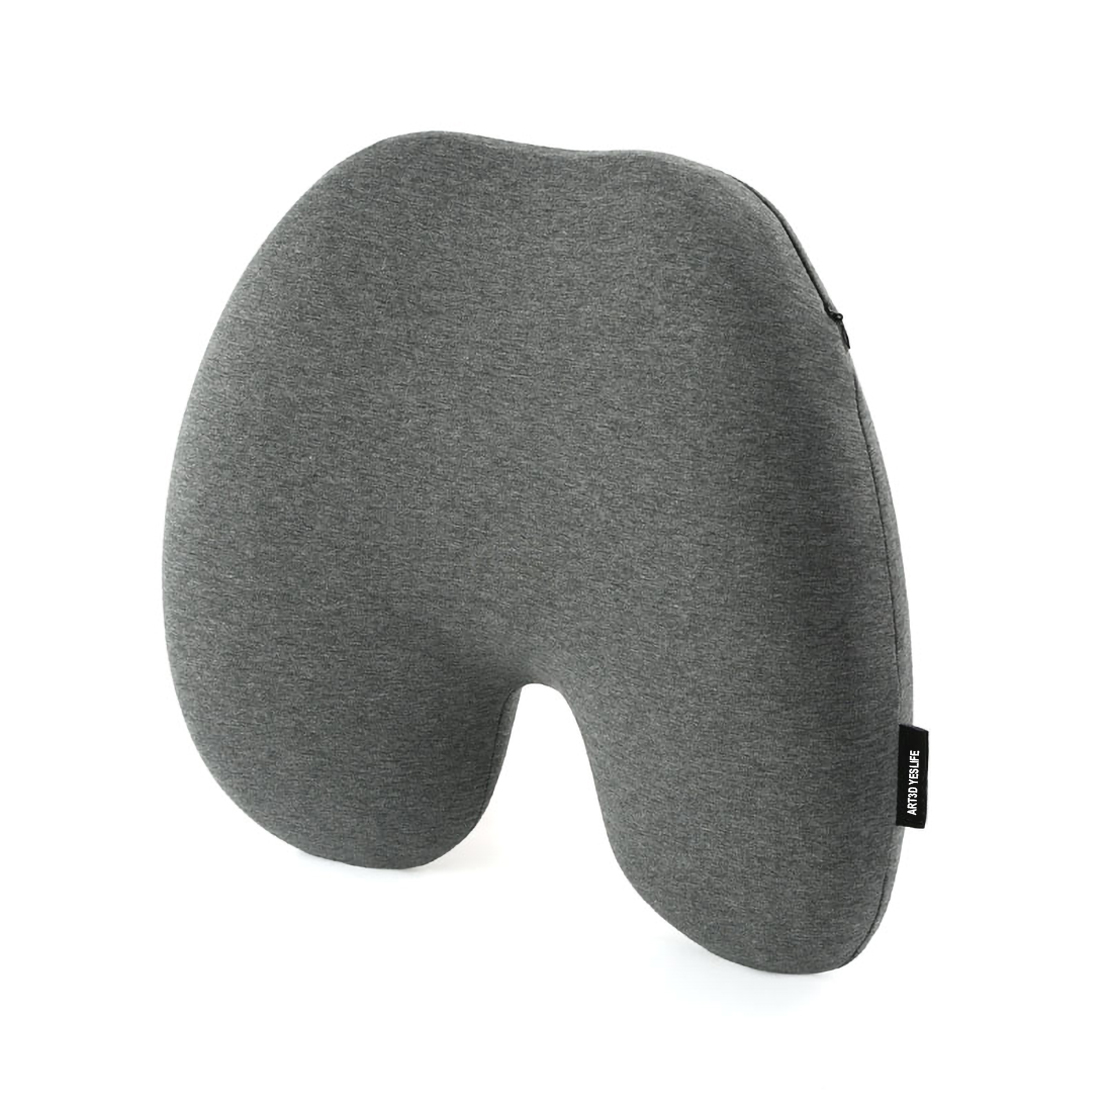 Gray Premium Lumbar Support Pillow Designed for Lower Back Pain